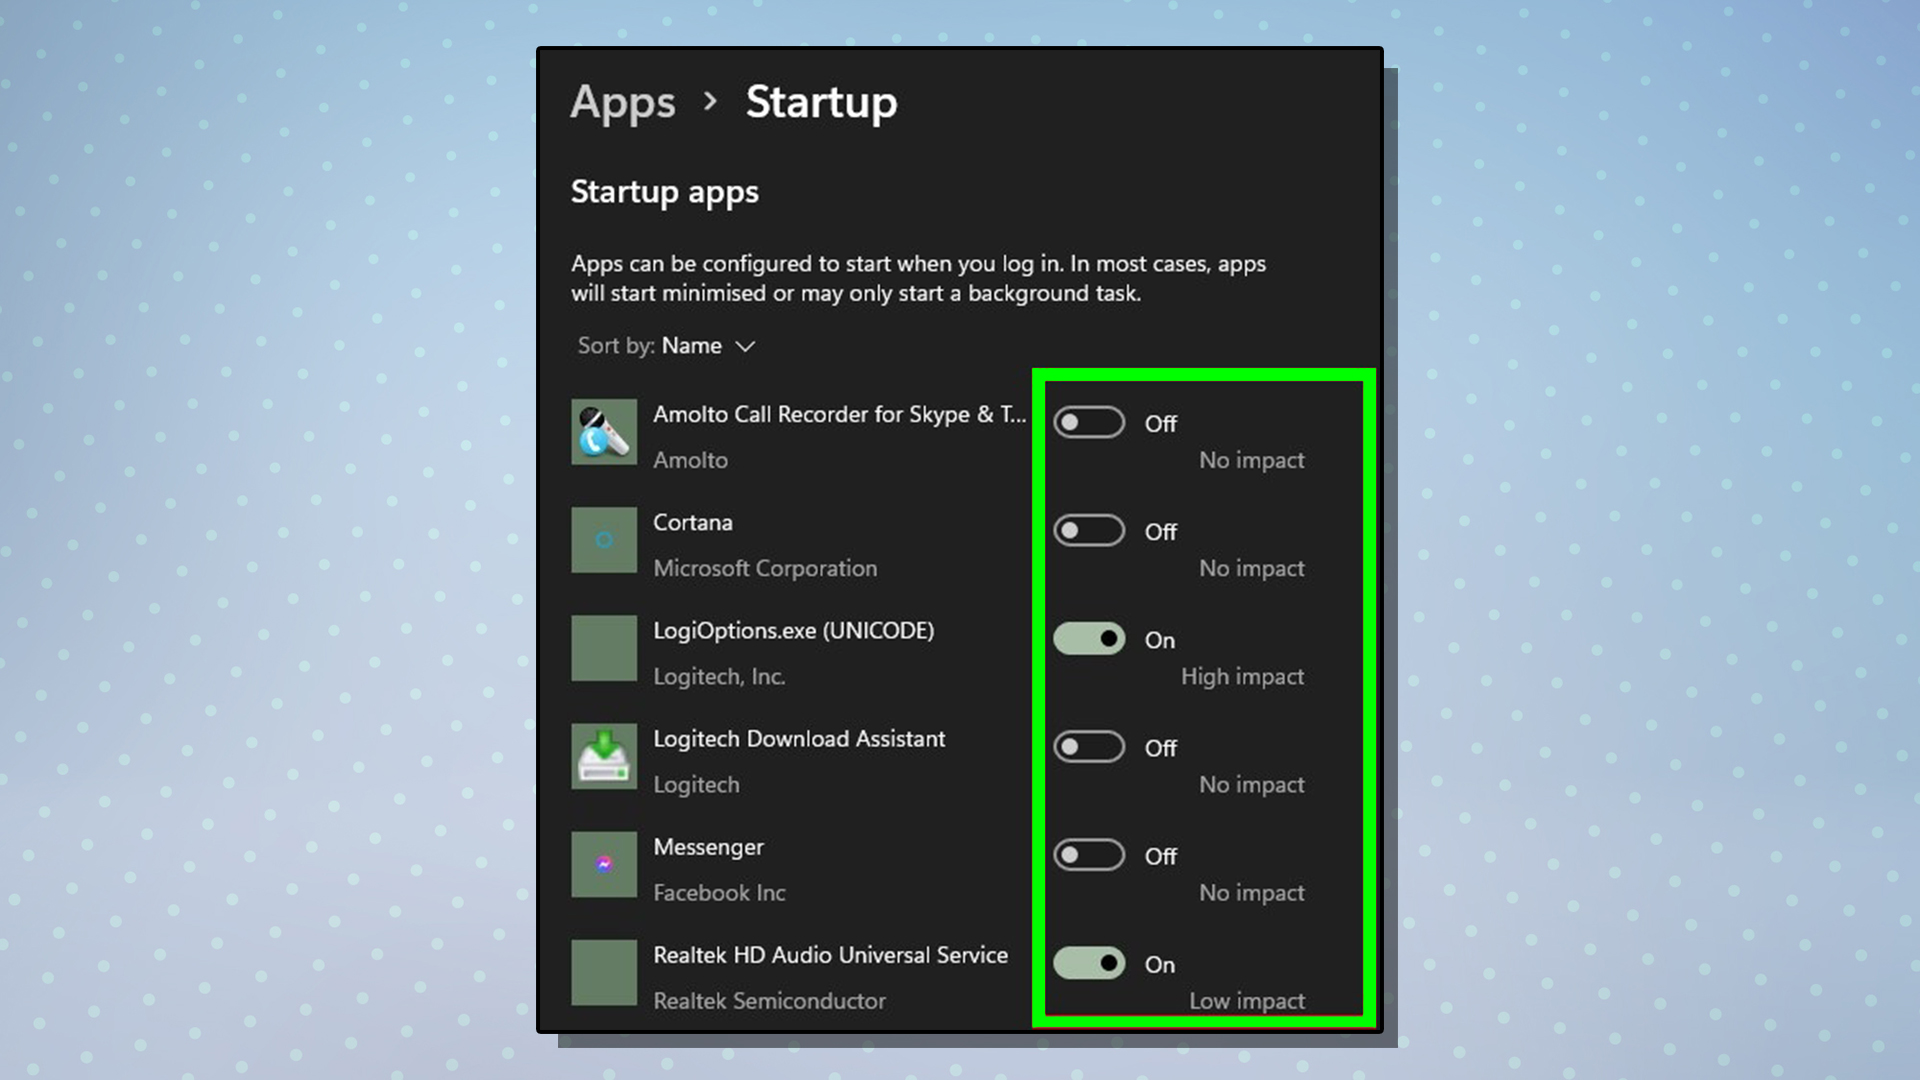 A screenshot from Windows 11 showing the Apps > Startup options